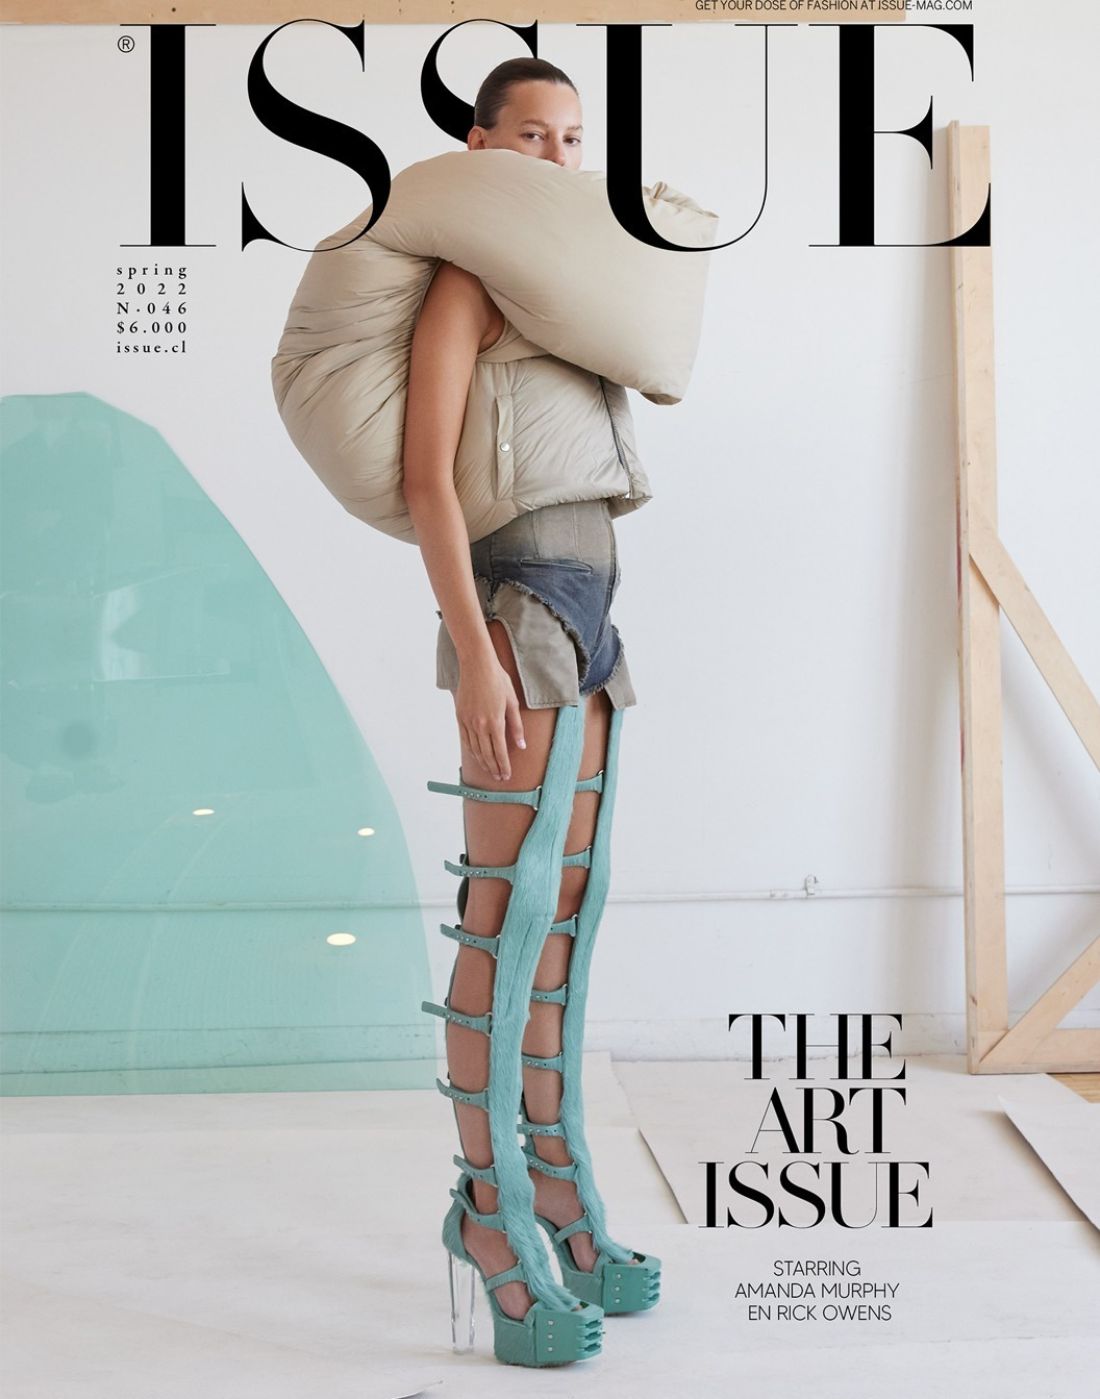 The Art Issue: Amanda Murphy Covers Issue Magazine Spring 2022, wearing Rick Owens